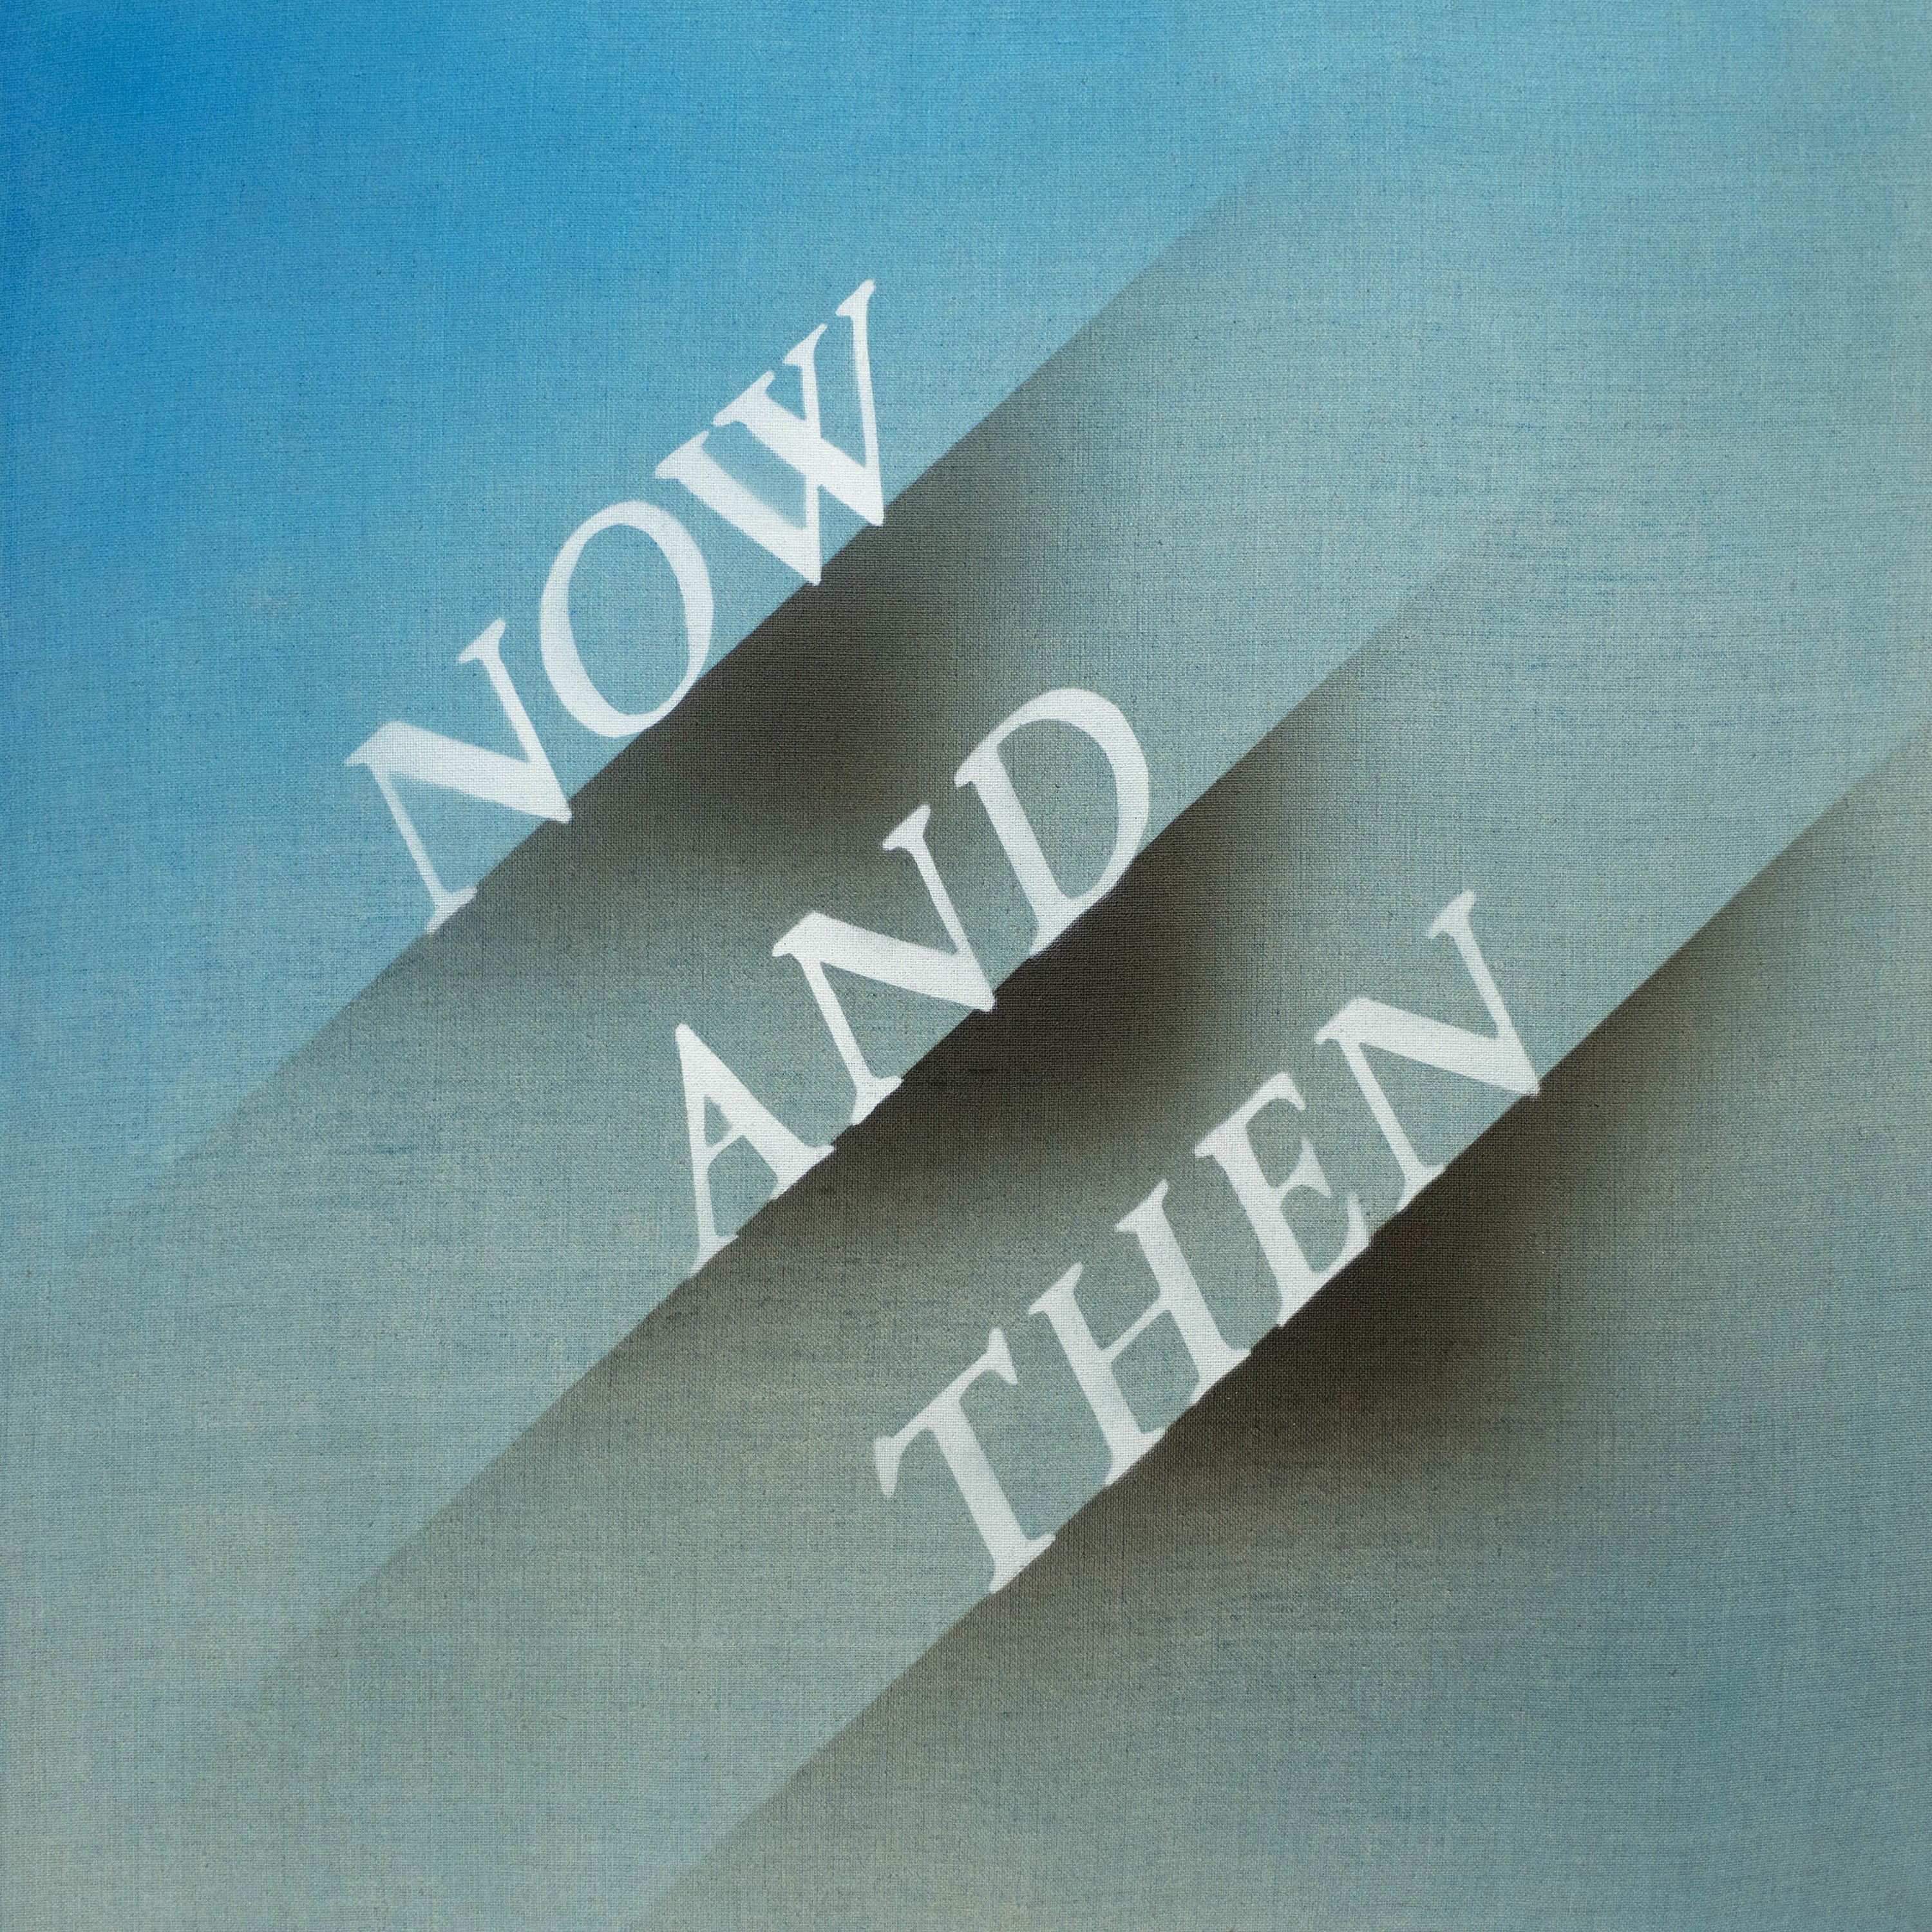 Beatles - Now And Then 12